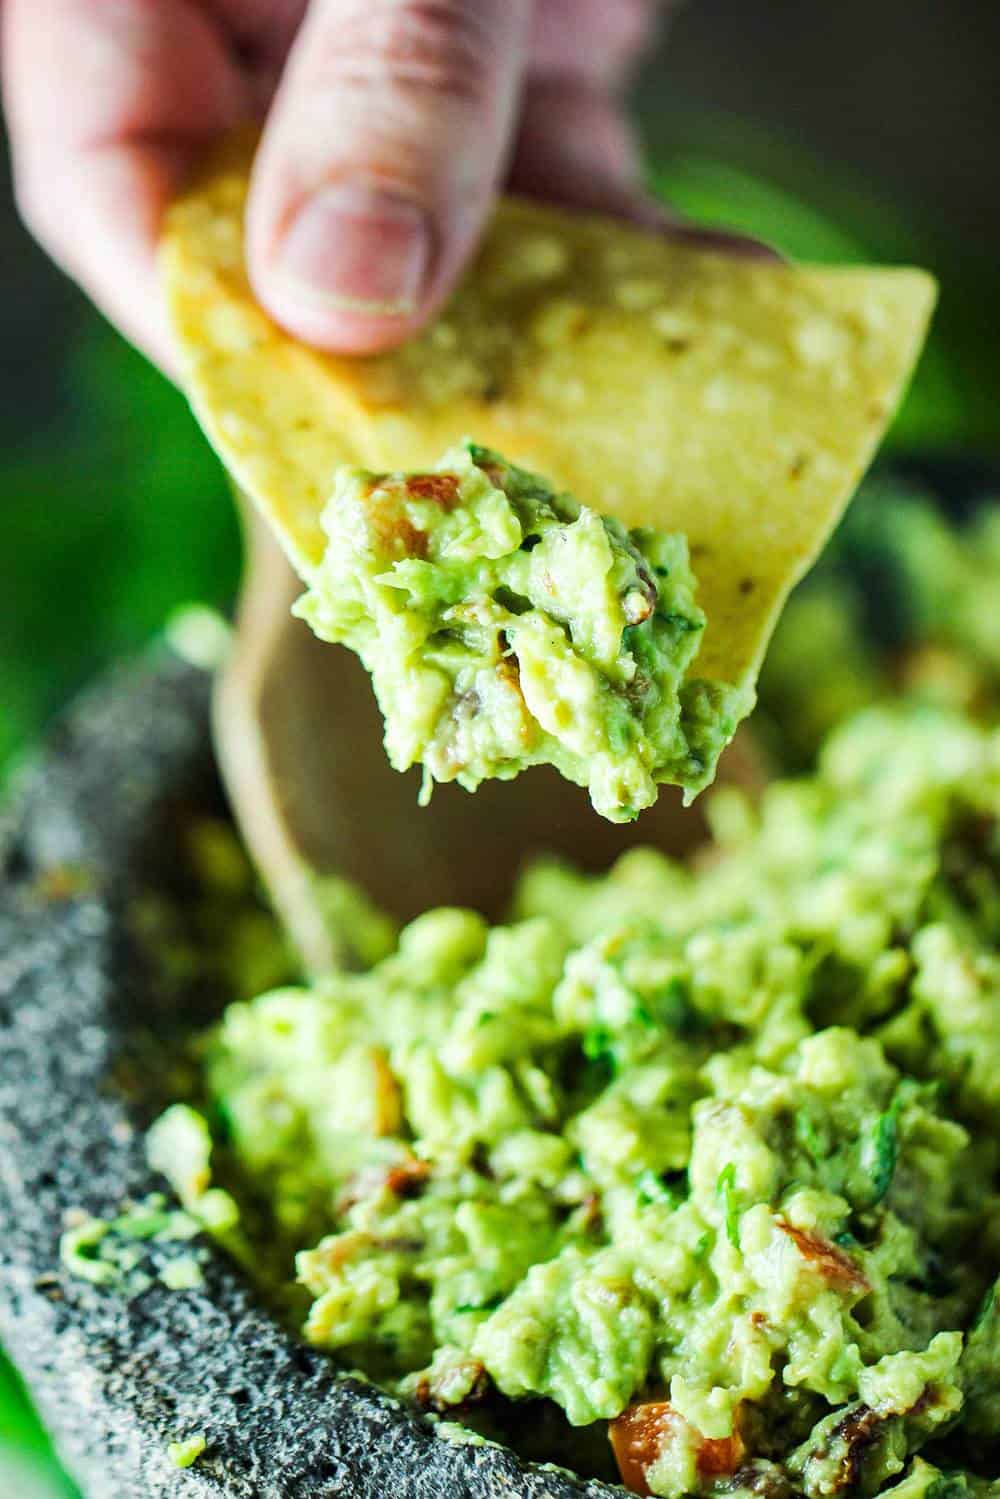 A hand holding a corn tortilla chip that has been dipped into fresh guacamole.